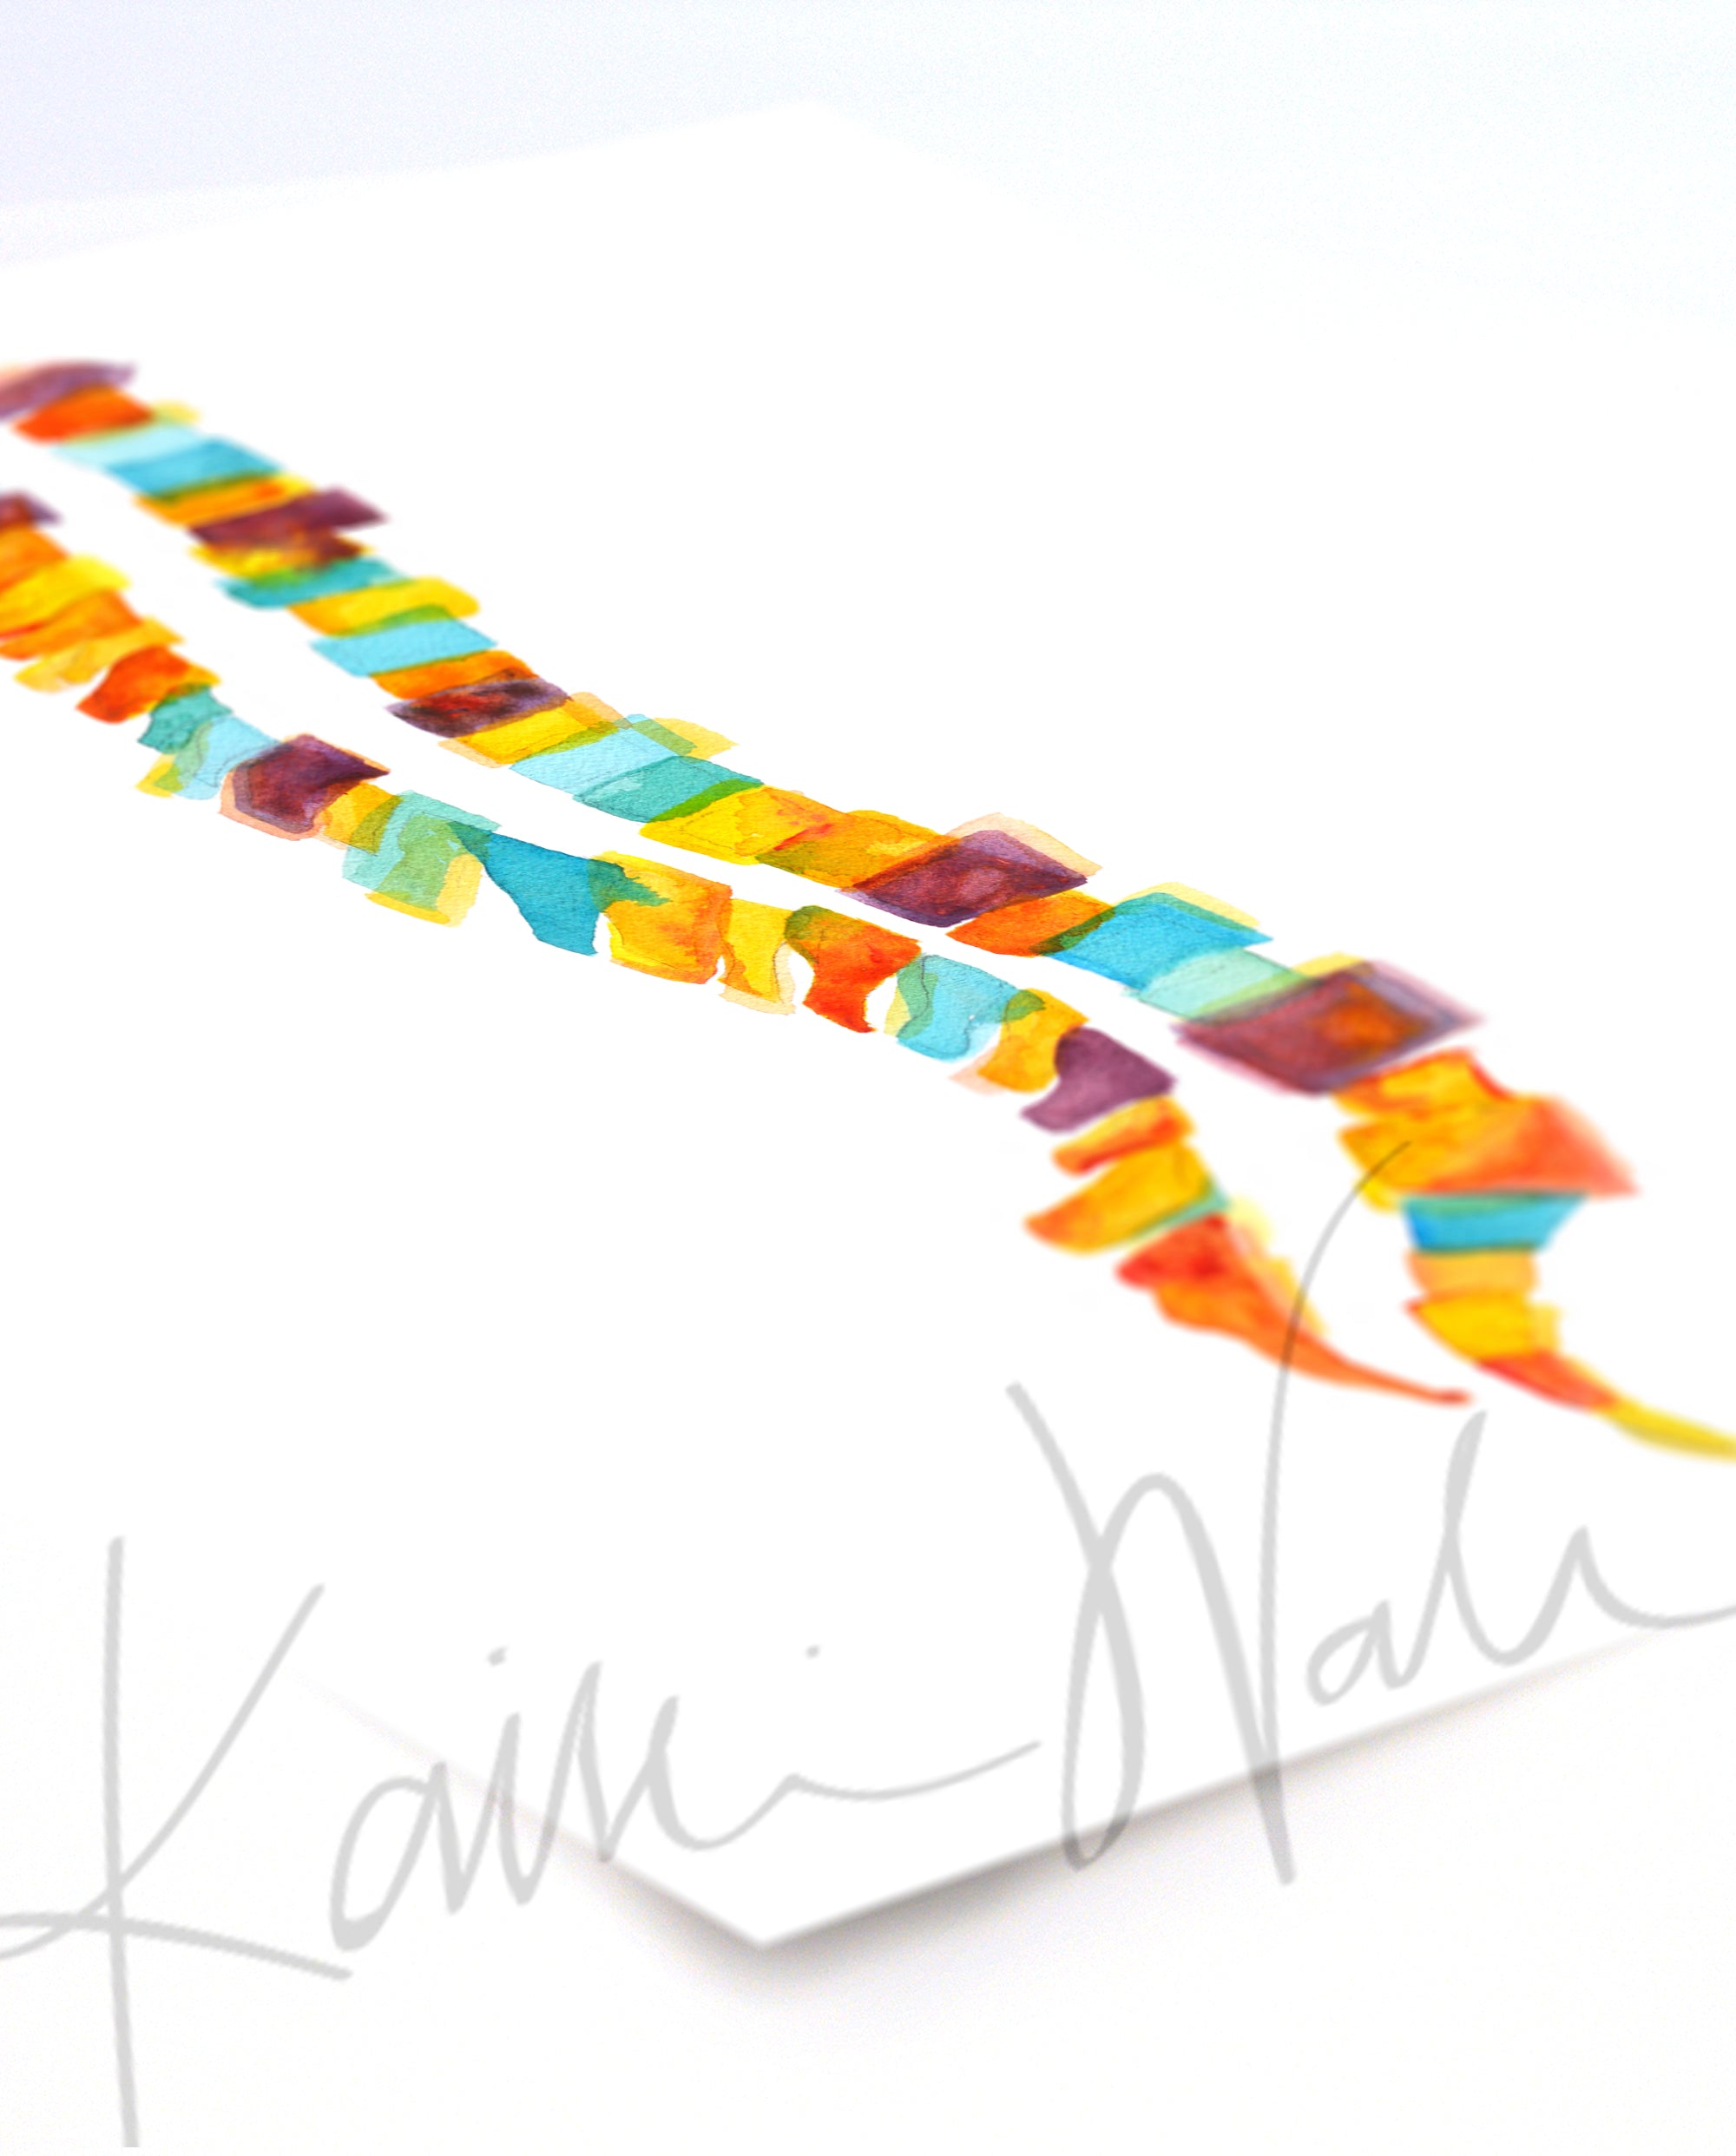 Unframed watercolor painting of a spinal columns in yellow, orange, burgundy and teal. The painting is at an angle.